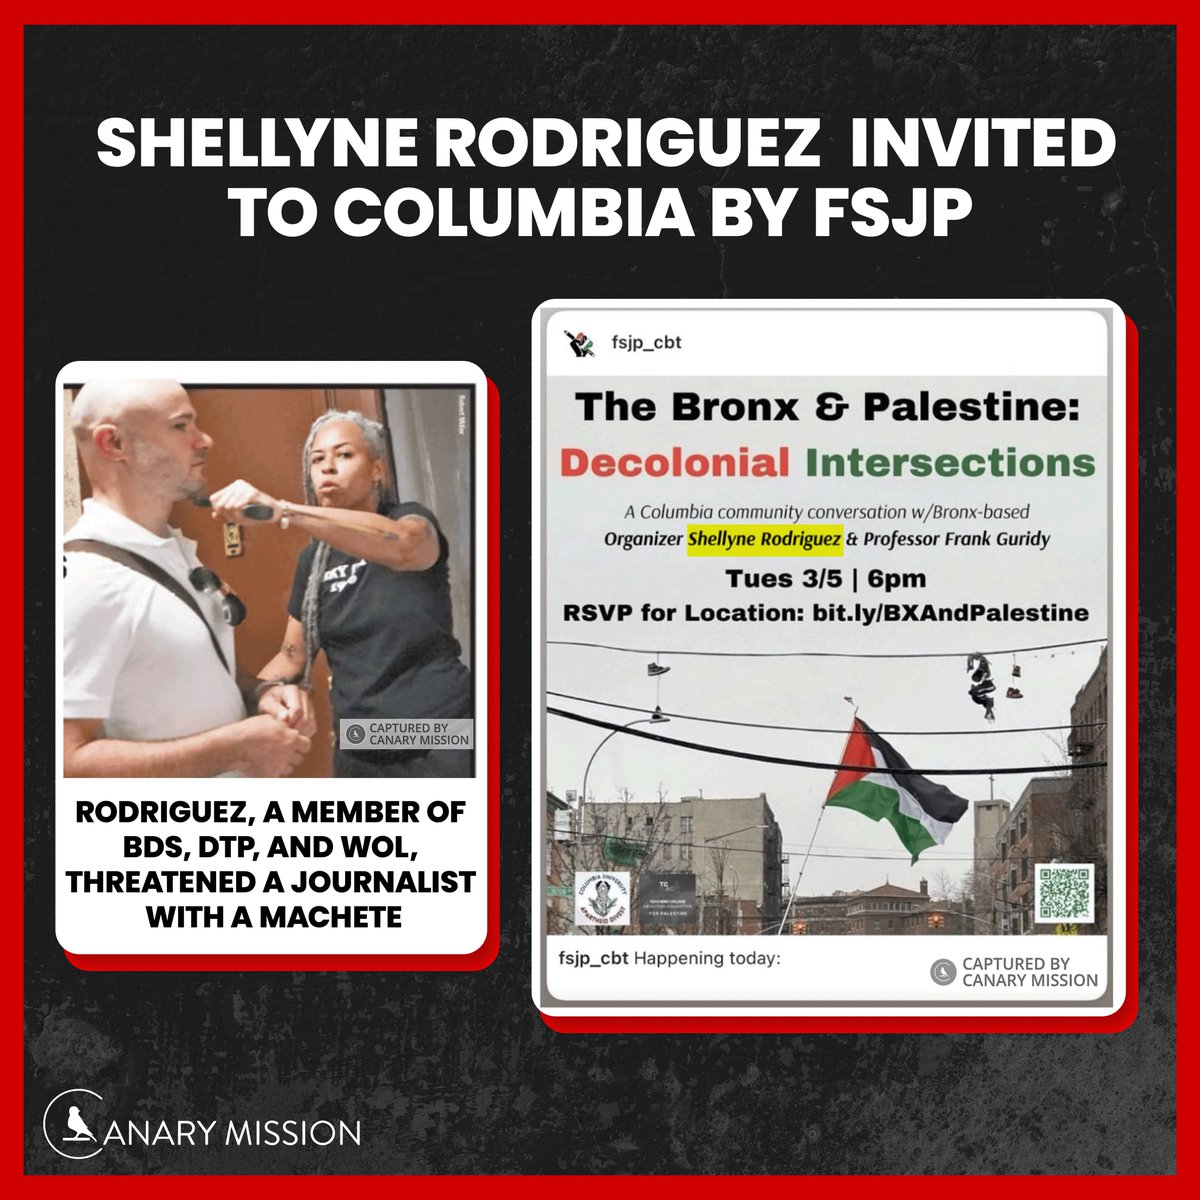 You might think threatening a reporter w/ a machete might land you in jail. NOPE! For fired antisemitic @cooperunion prof Shellyne Rodriguez (who compared Zionists to cockroaches) that behavior garners an invitation to @Columbia by @Fsjp_cbt canarymission.org/professor/Shel…
H/T…